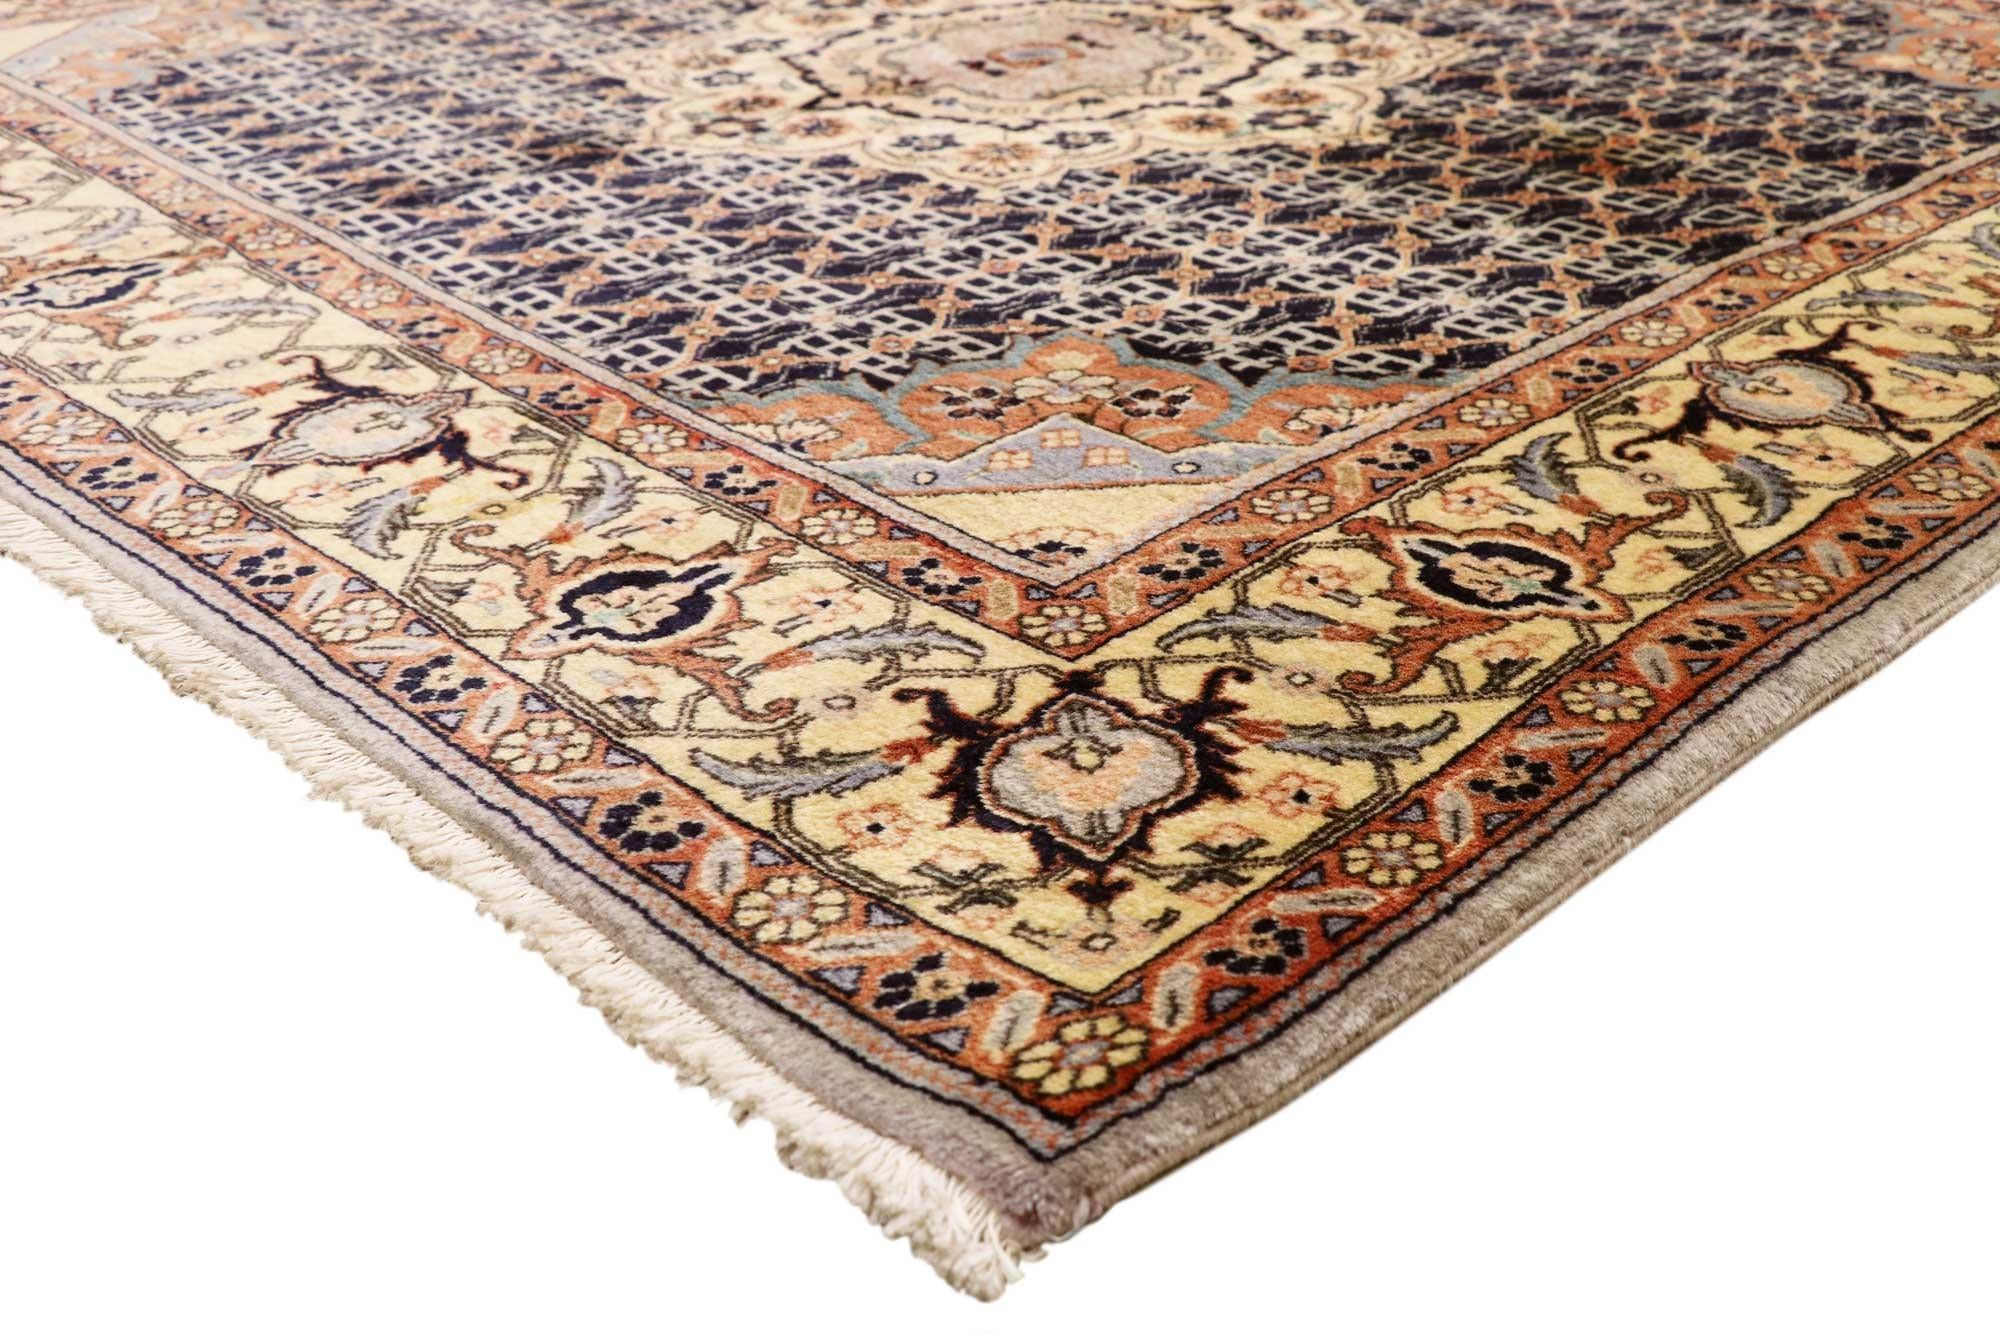 76053 Vintage Persian Bijar Rug, 06'04 x 06'06. With its timeless style, incredible detail and texture, this hand knotted wool vintage Persian Bijar rug is a captivating vision of woven beauty. The eye-catching lattice design and sophisticated color